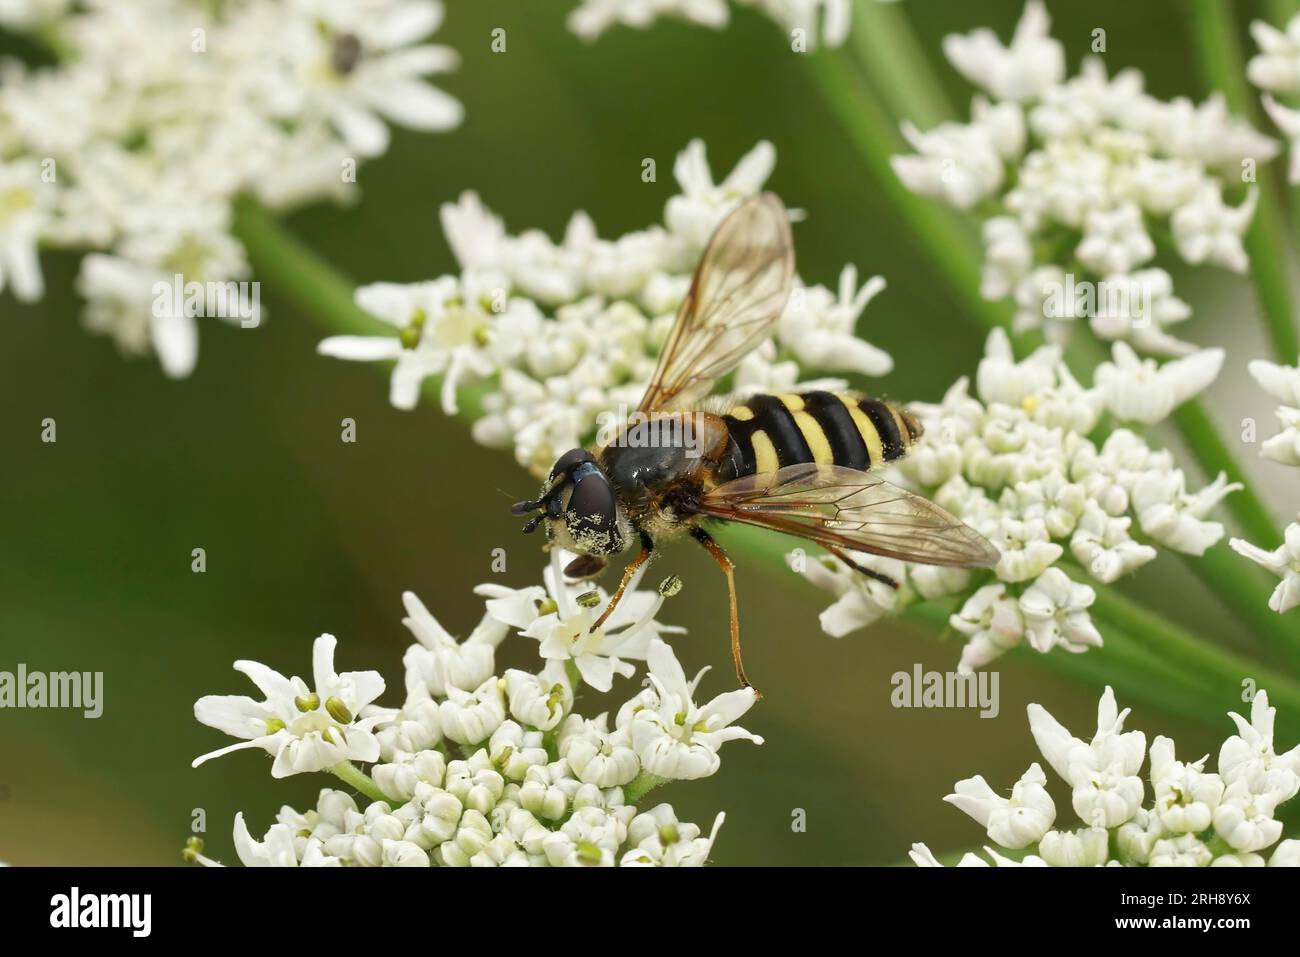 Natural closeup on a wasp mimic hoverfly, Megasyrphus erraticus on white Hogweed , Heracleum sphondylium Stock Photo